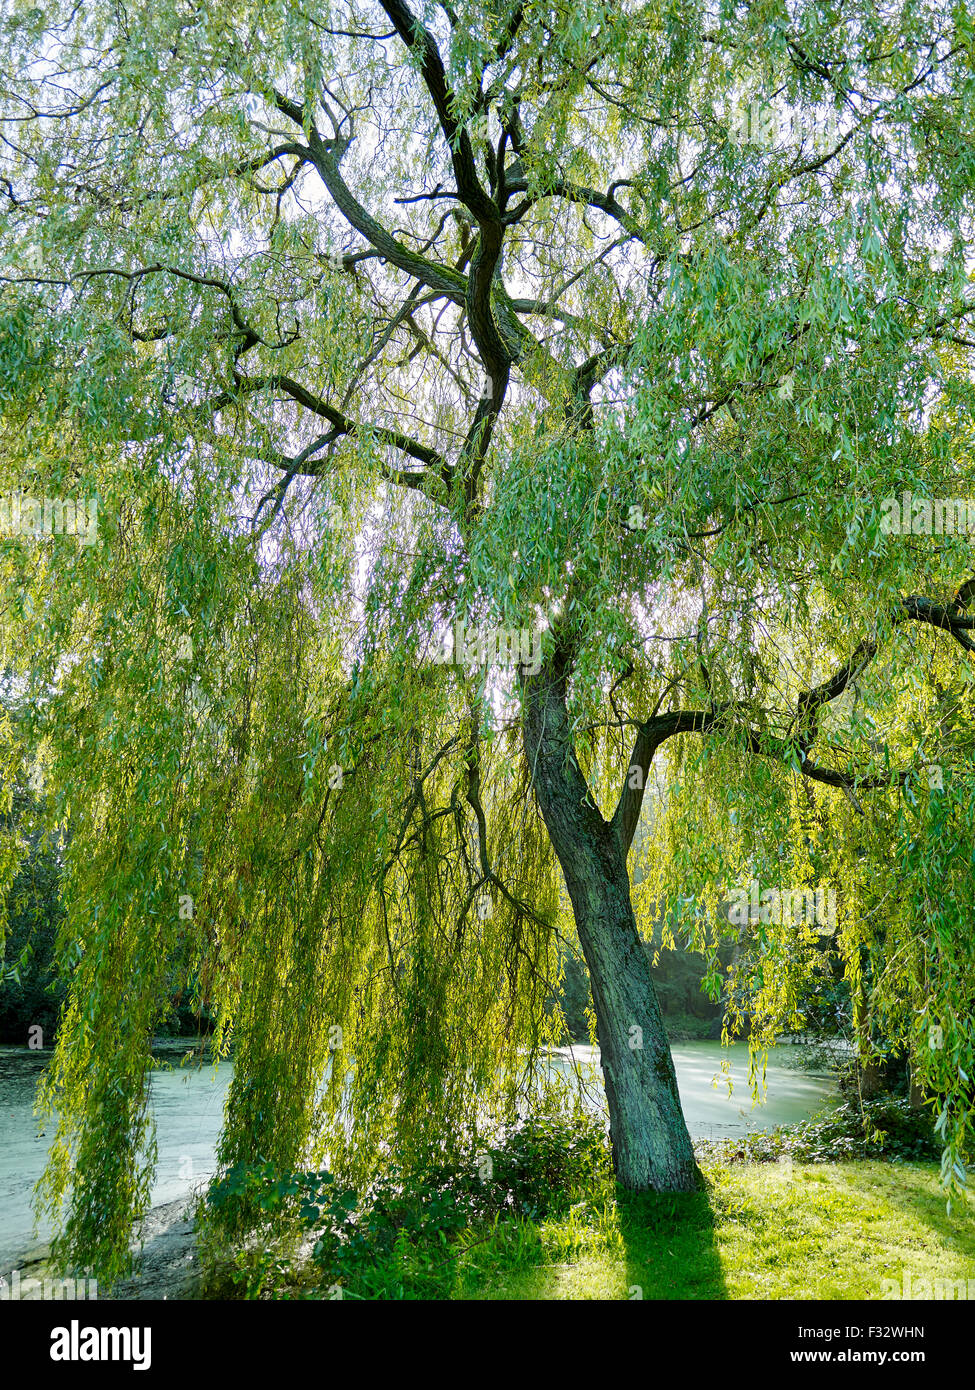 Autumn Willow Tree High Resolution Stock Photography And Images Alamy